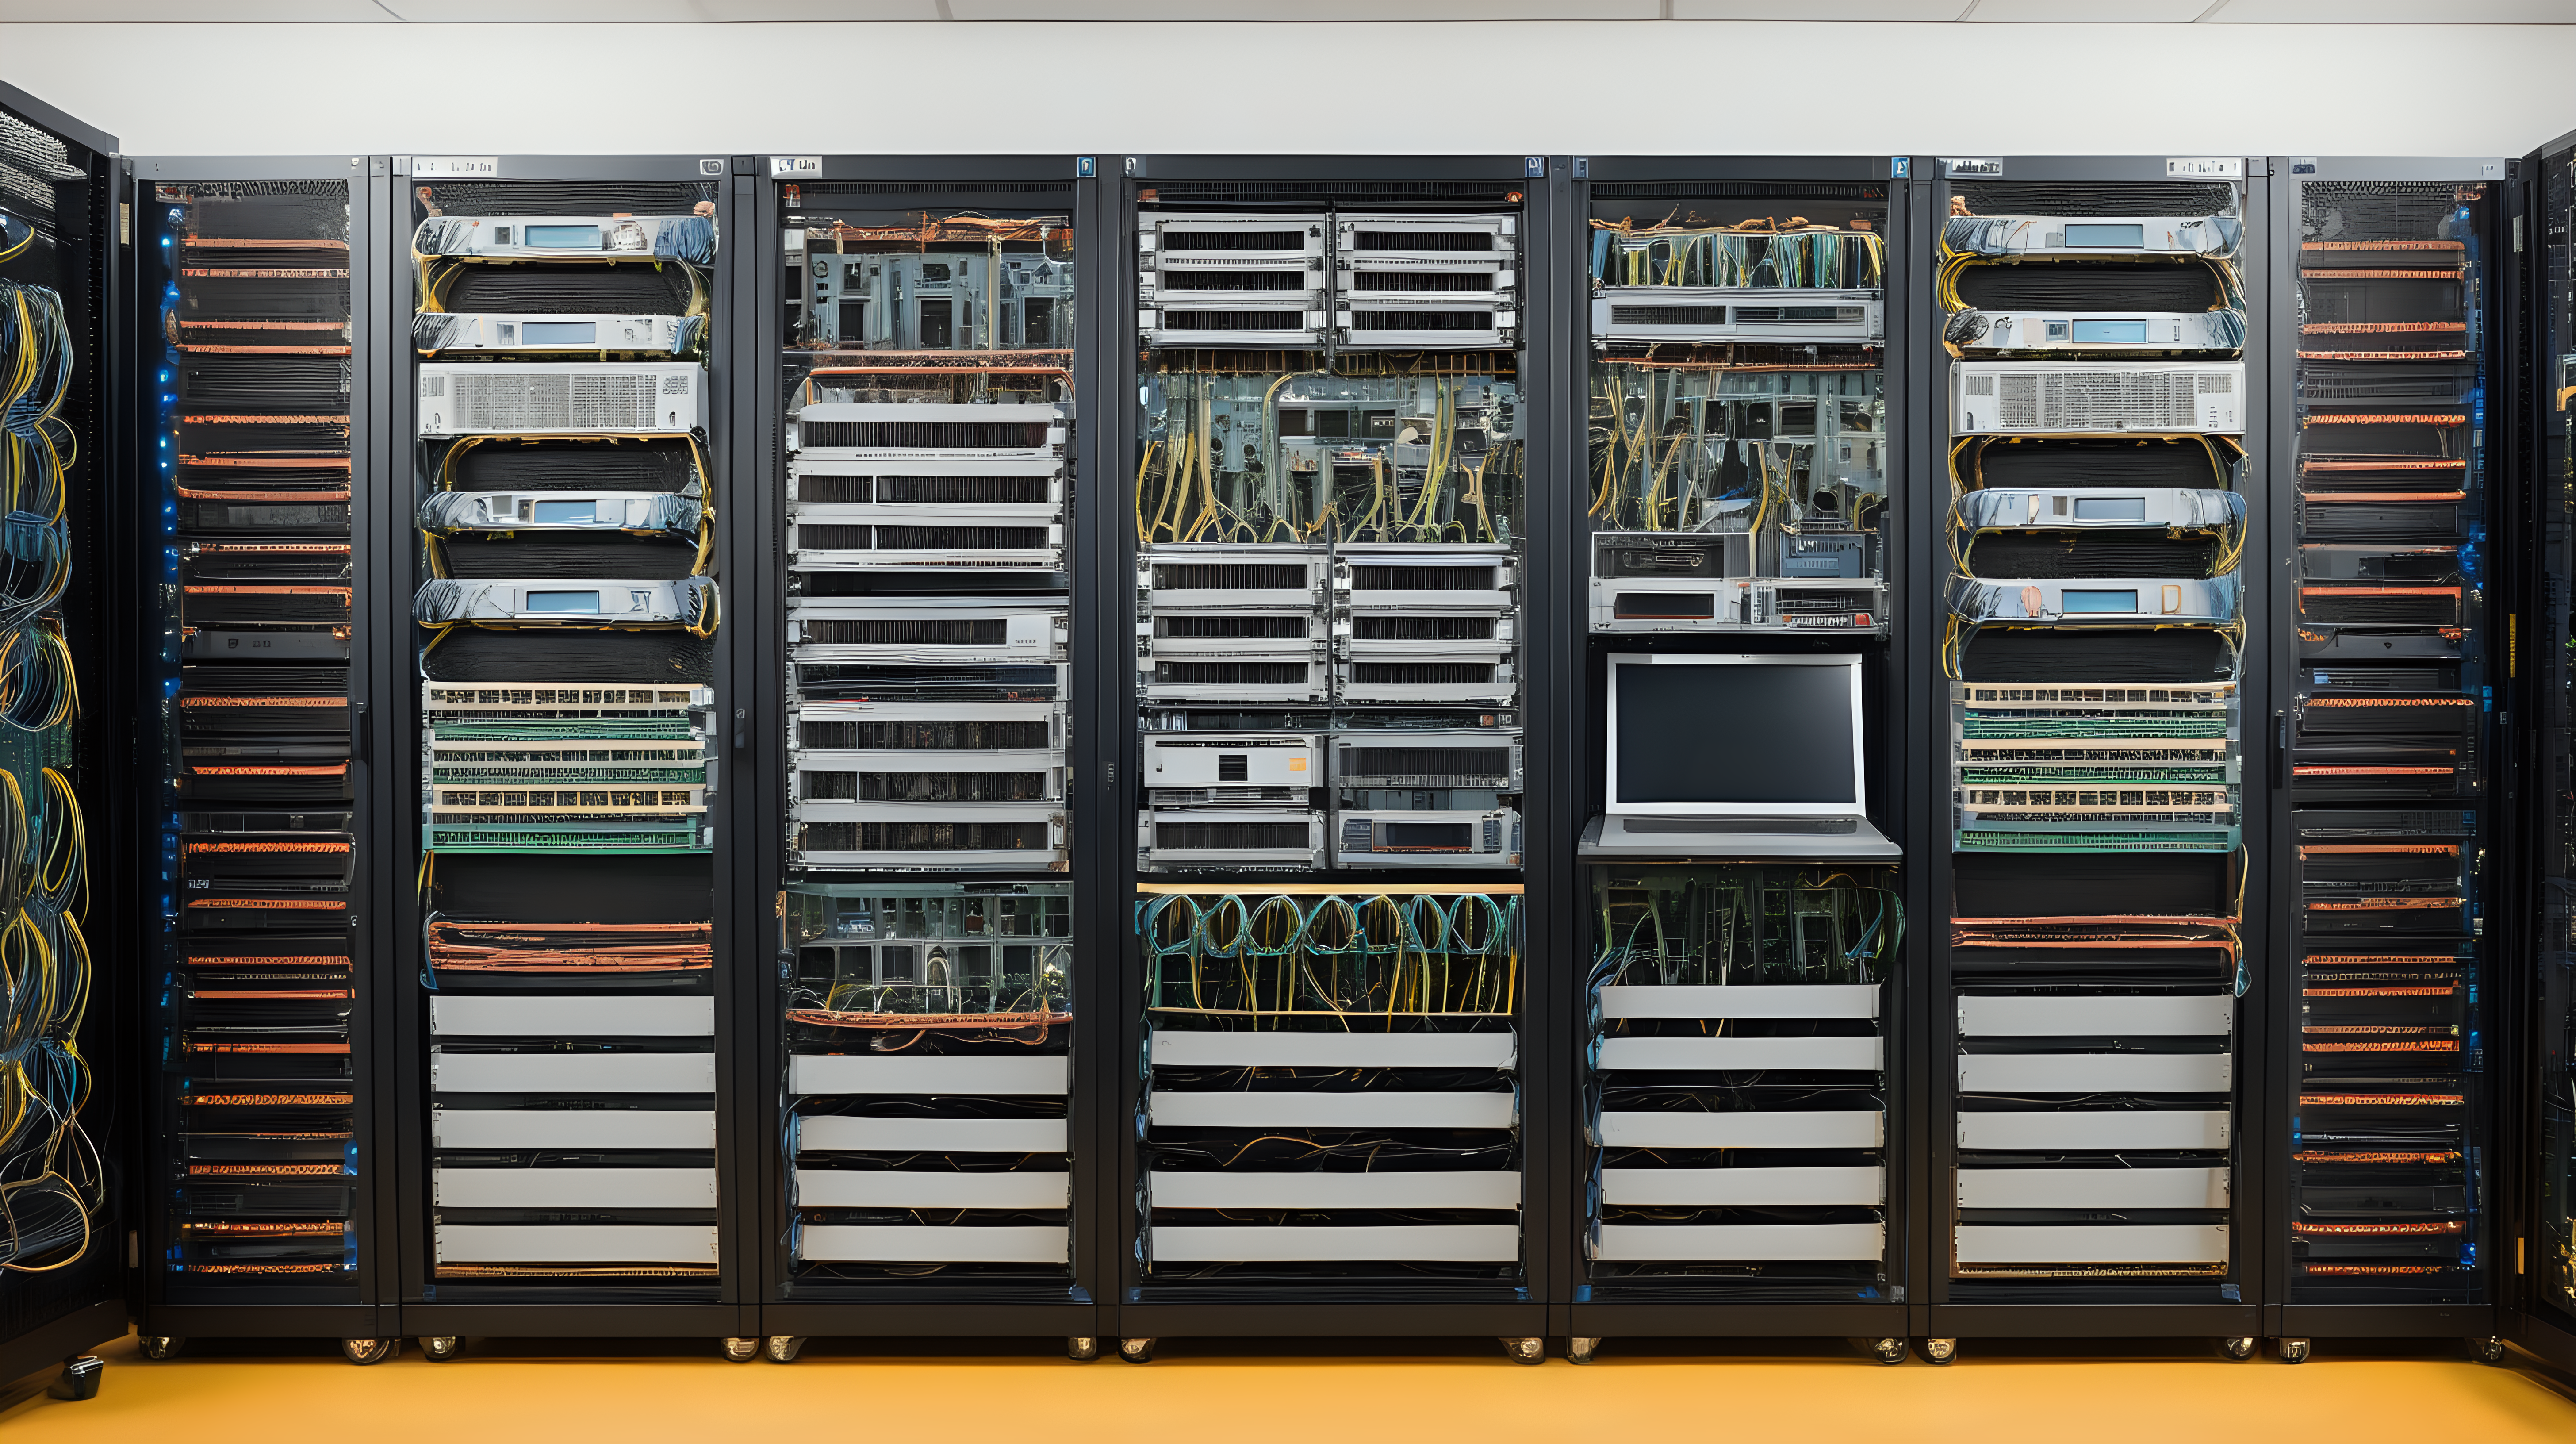 a high quality photograph of a frontal shot of a server rack filled with 1u and 2u workstations and 4 u servers - they all have a hand crafted quality to them - in the style of a wes anderson film